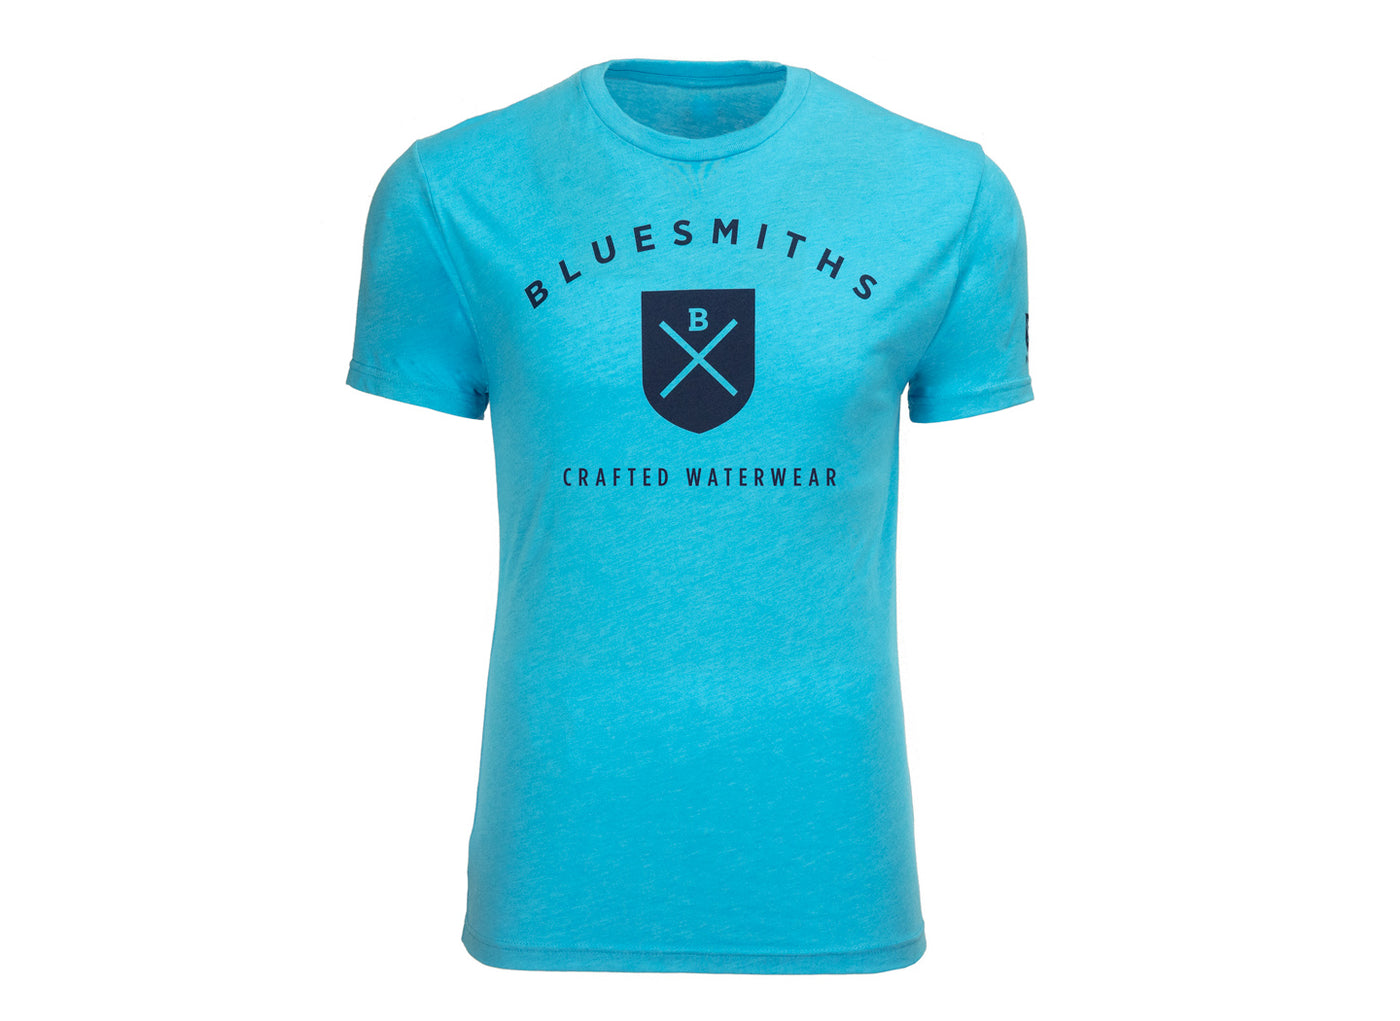 Bluesmiths Crafted Waterwear Logo Tee Shirt - Turquoise